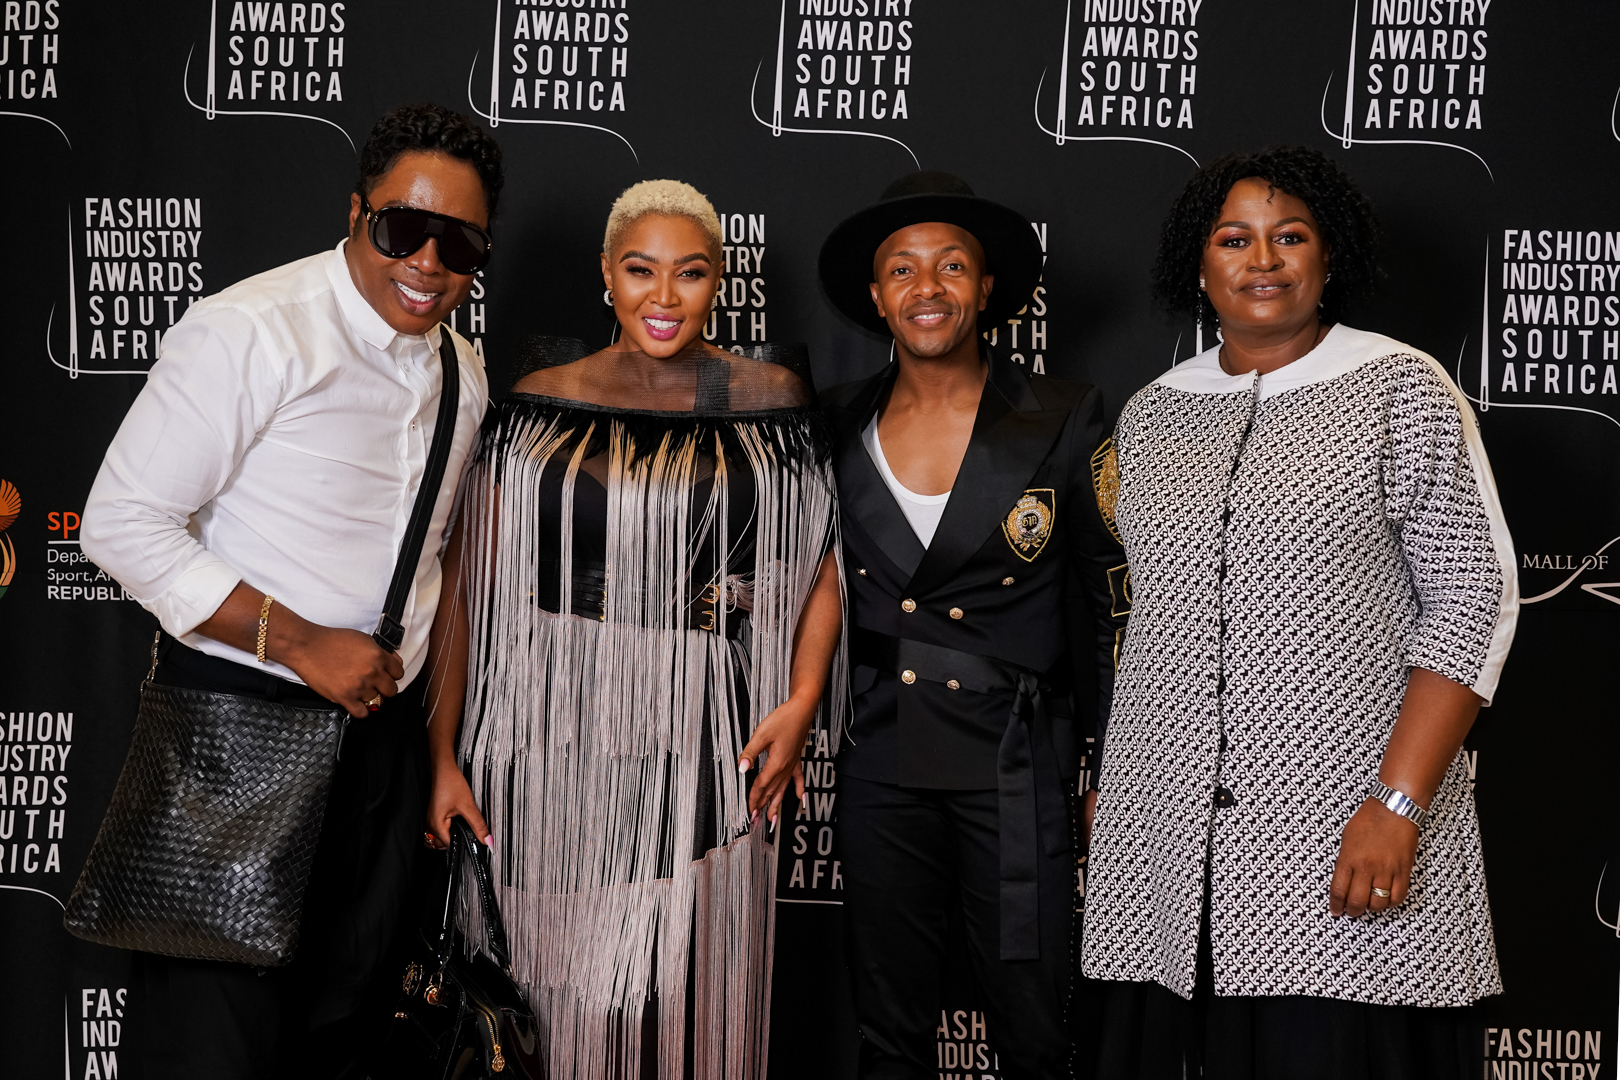 The inaugural Fashion Industry Awards South Africa, and the categories are…, EntertainmentSA News South Africa